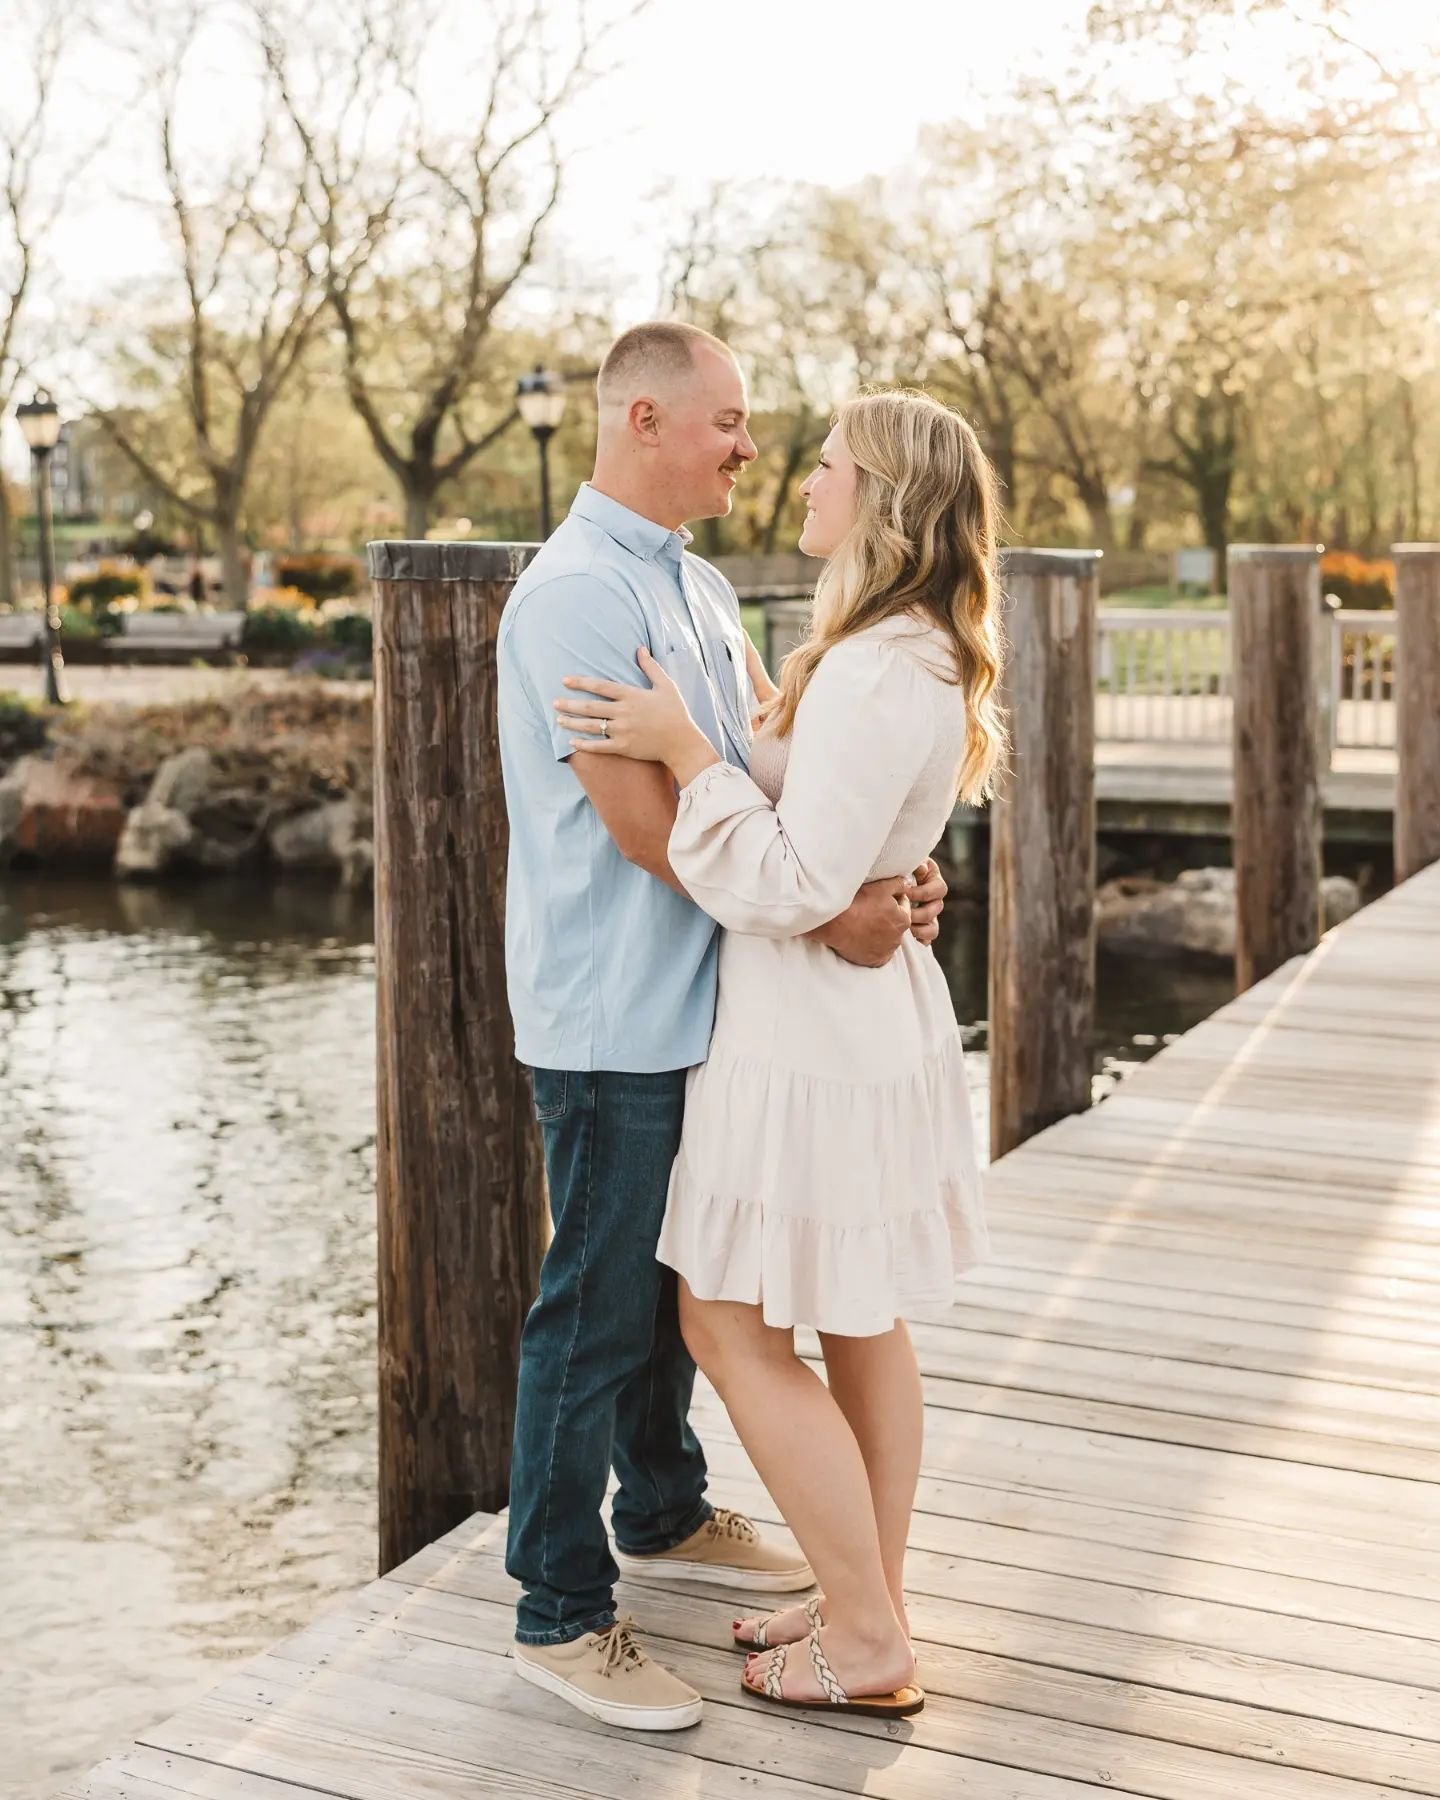 Spring engagement sessions just make me so happy. I will gladly go back to Havre de Grace in a heartbeat if it means photographing more engagement sessions as pretty as this one. This popped up in my memories from a year ago at this time, so I though